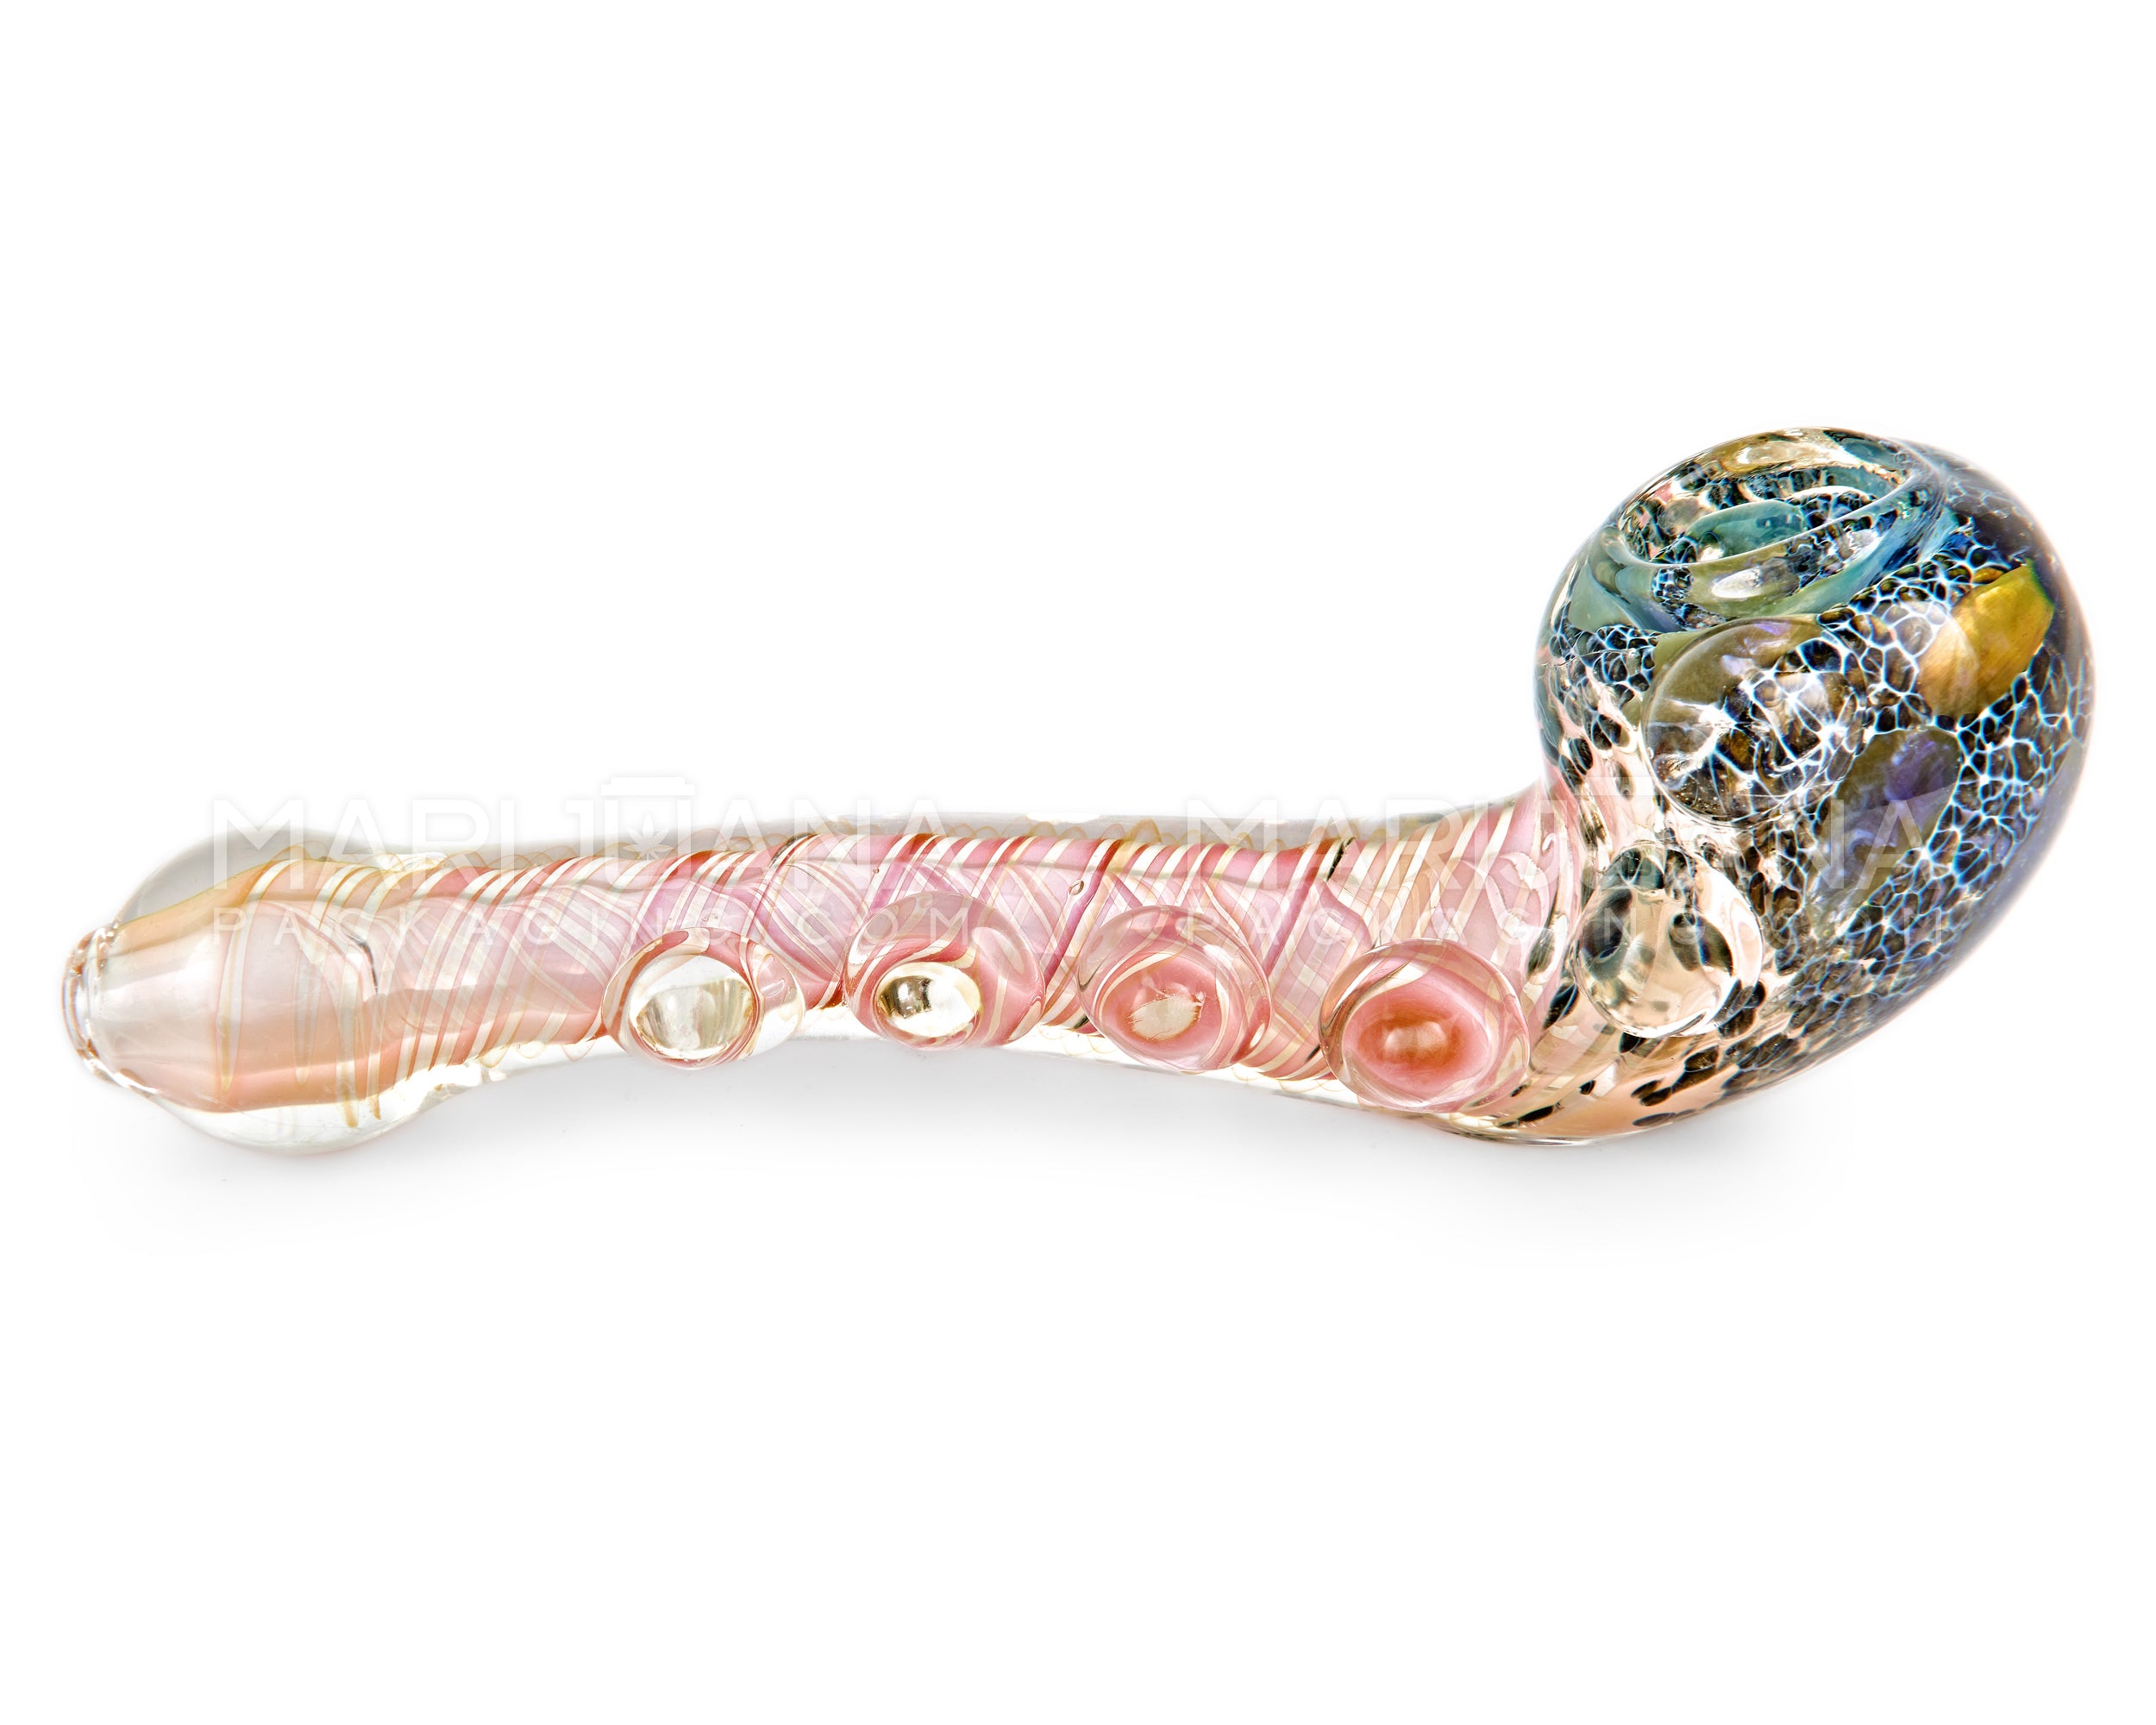 Frit & Pink Fumed Spiral Sherlock Hand Pipe w/ Bubble Trap & Multi Knockers | 6in Long - Glass - Assorted - 8